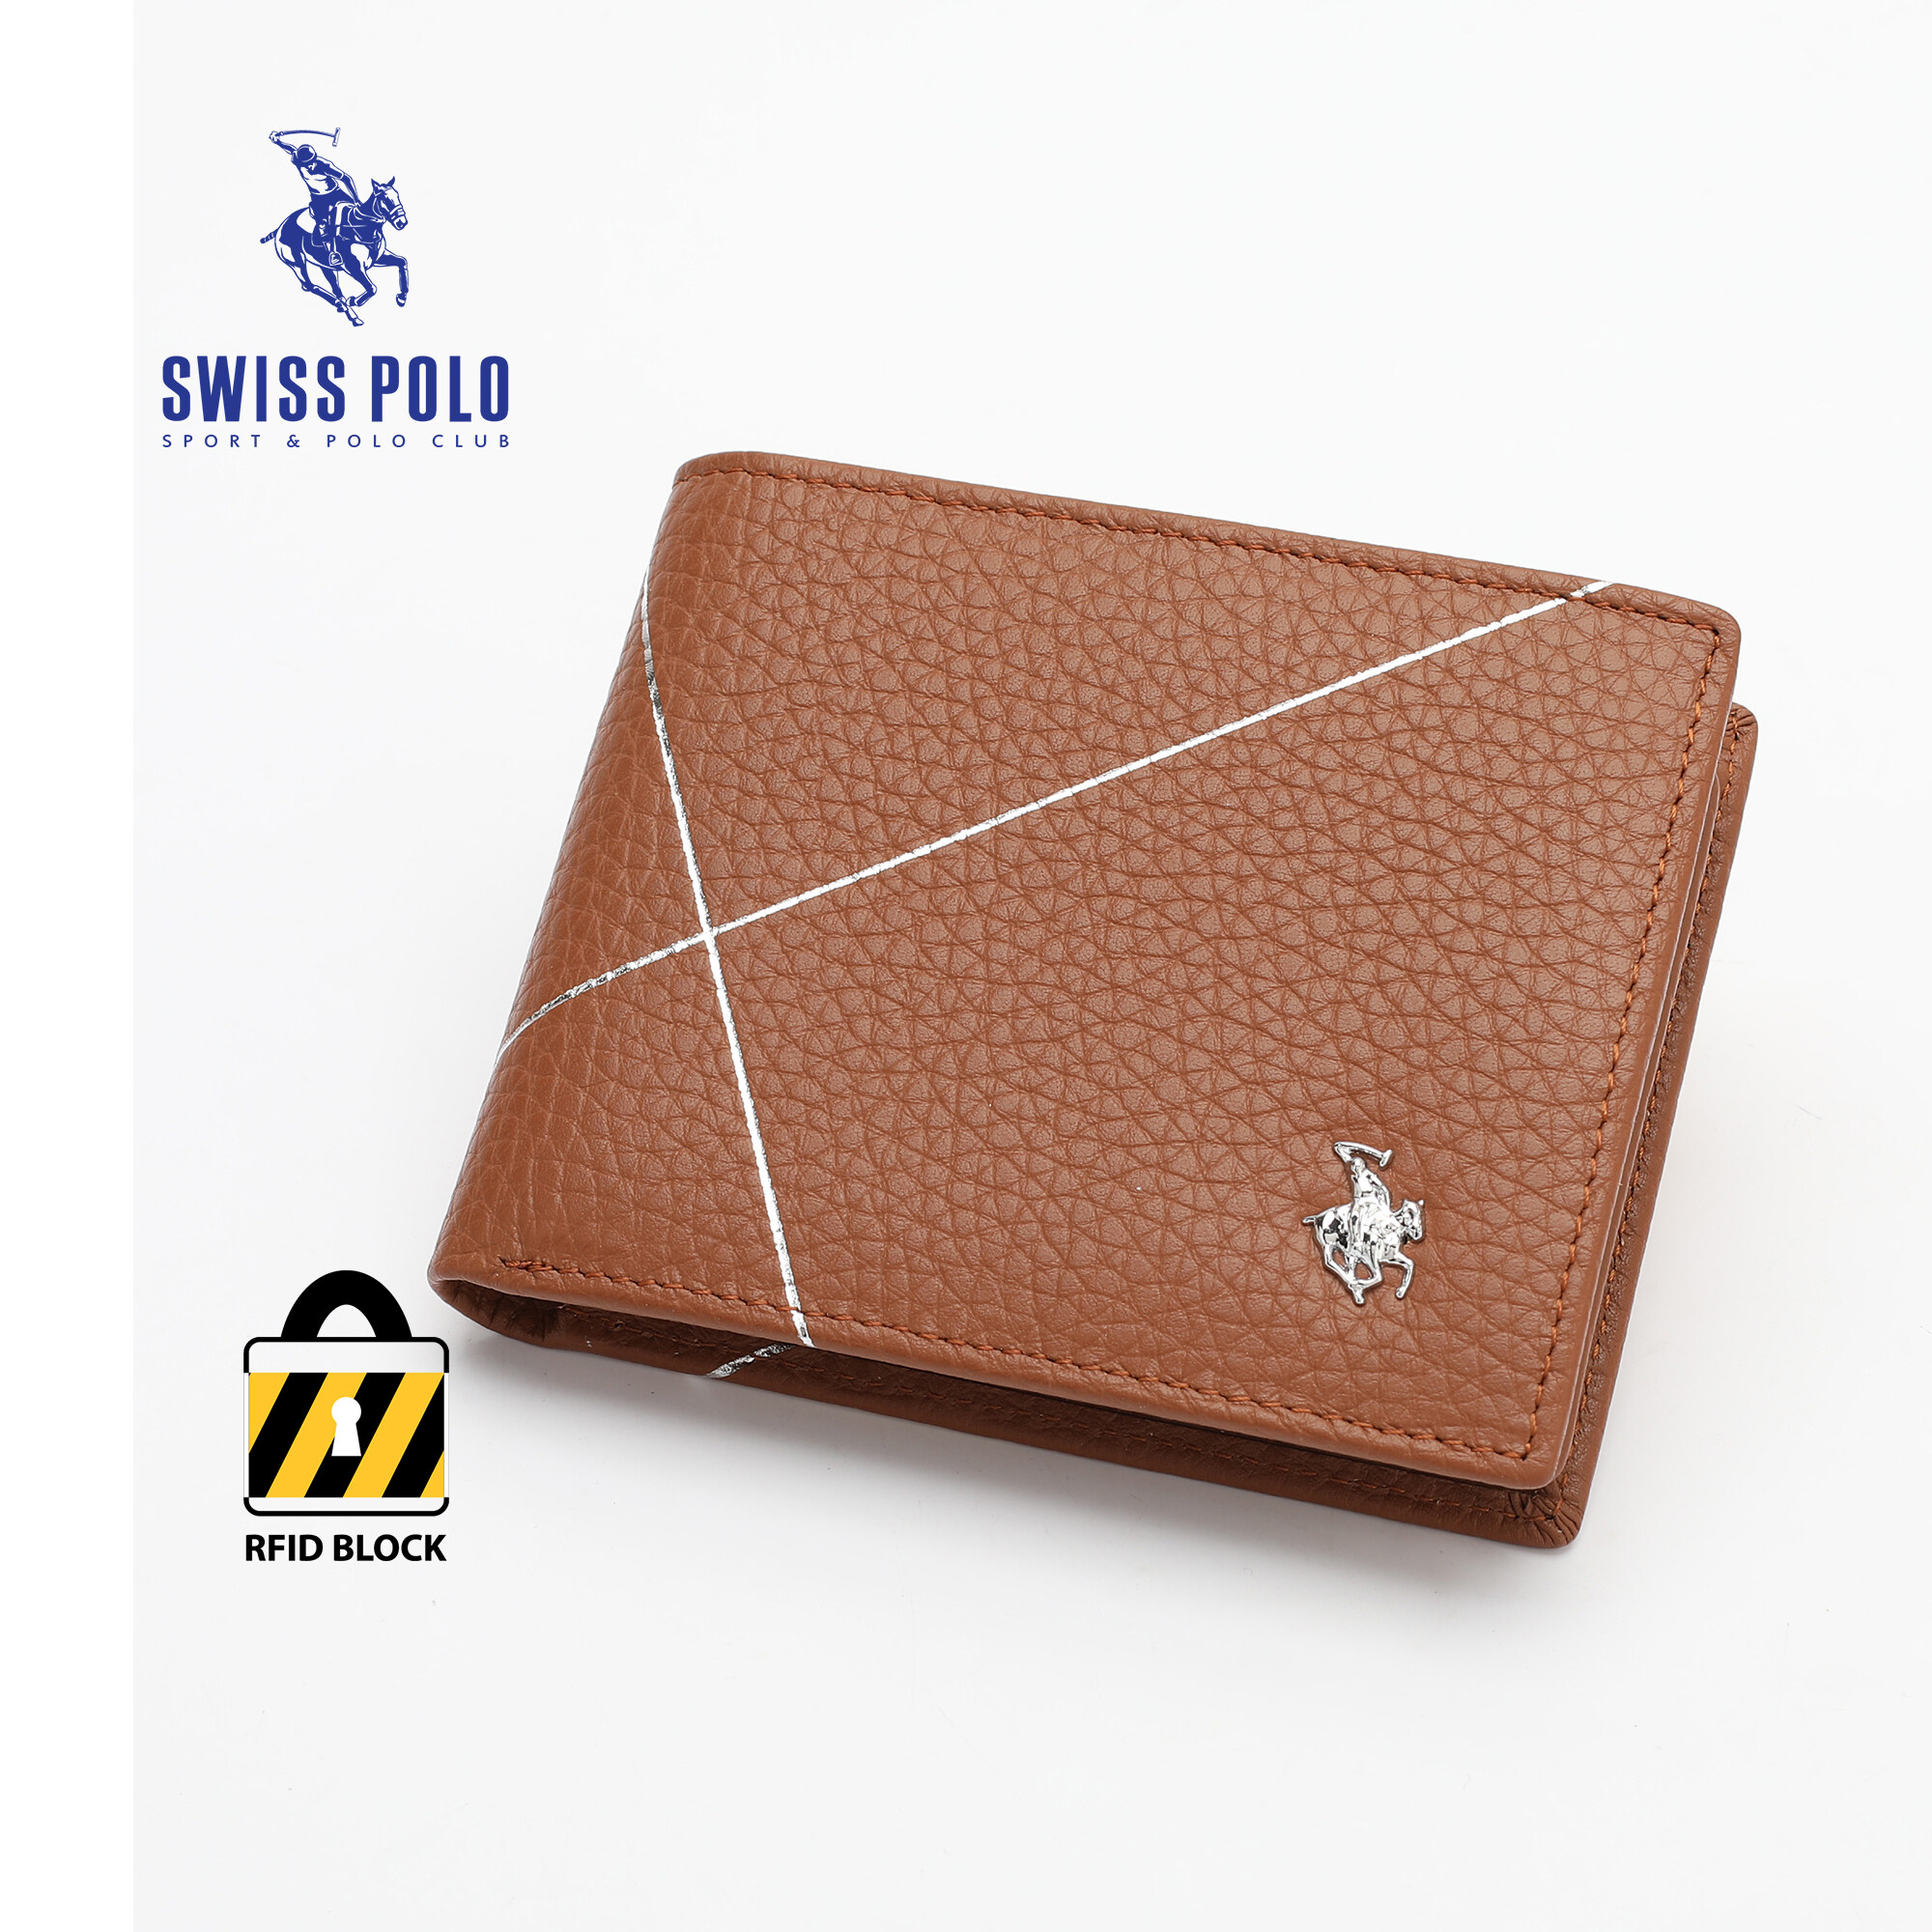 SWISS POLO Genuine Leather RFID Bifold Short Wallet SW 124-3 BROWN